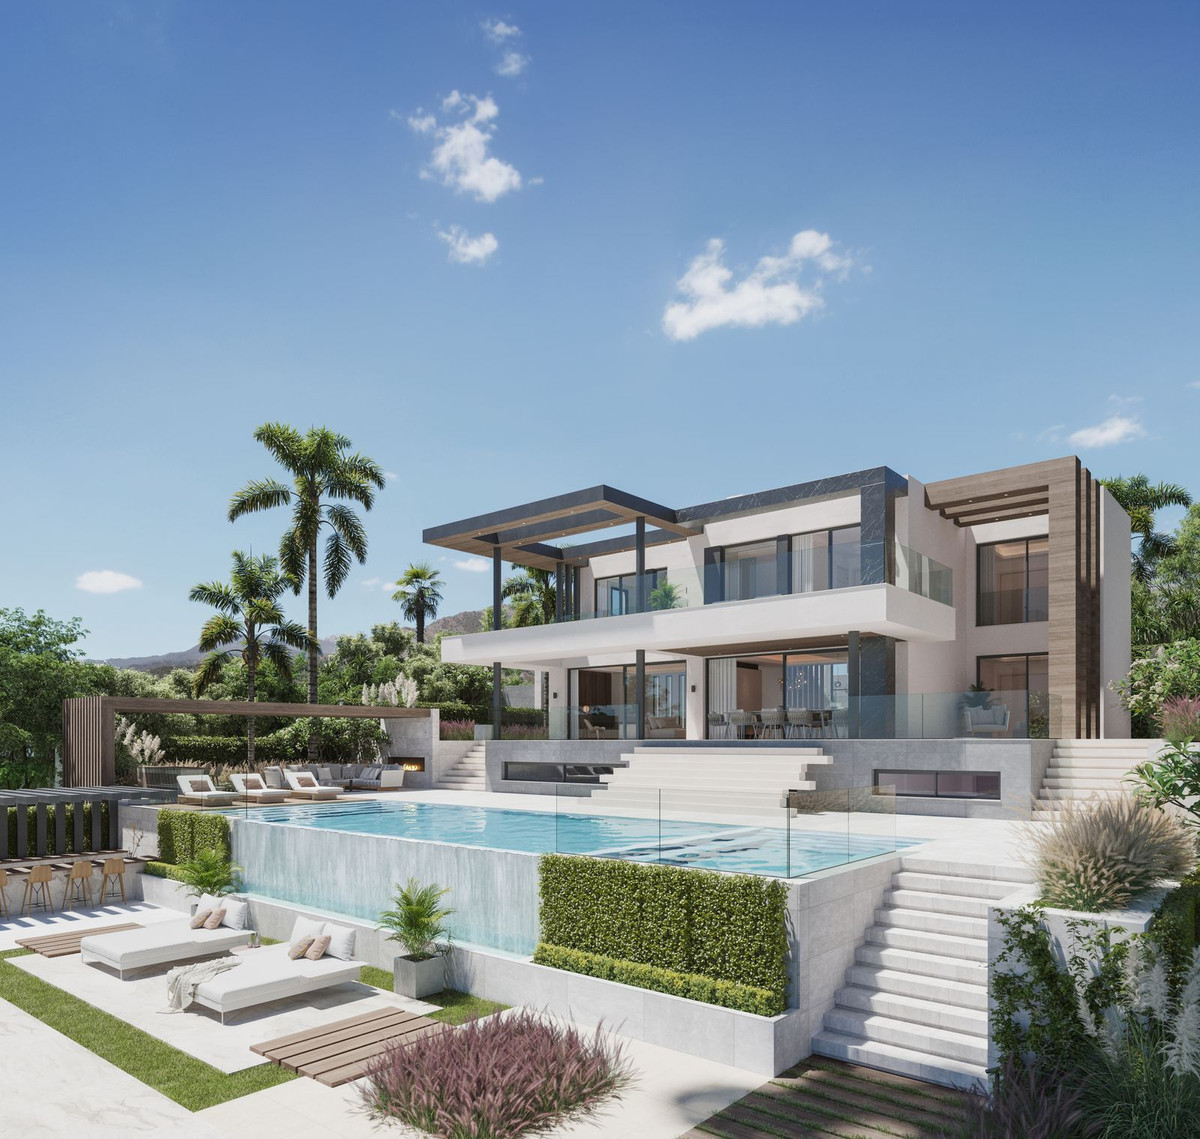 Upmost quality project villa with infinity pool within a luxury community sur...